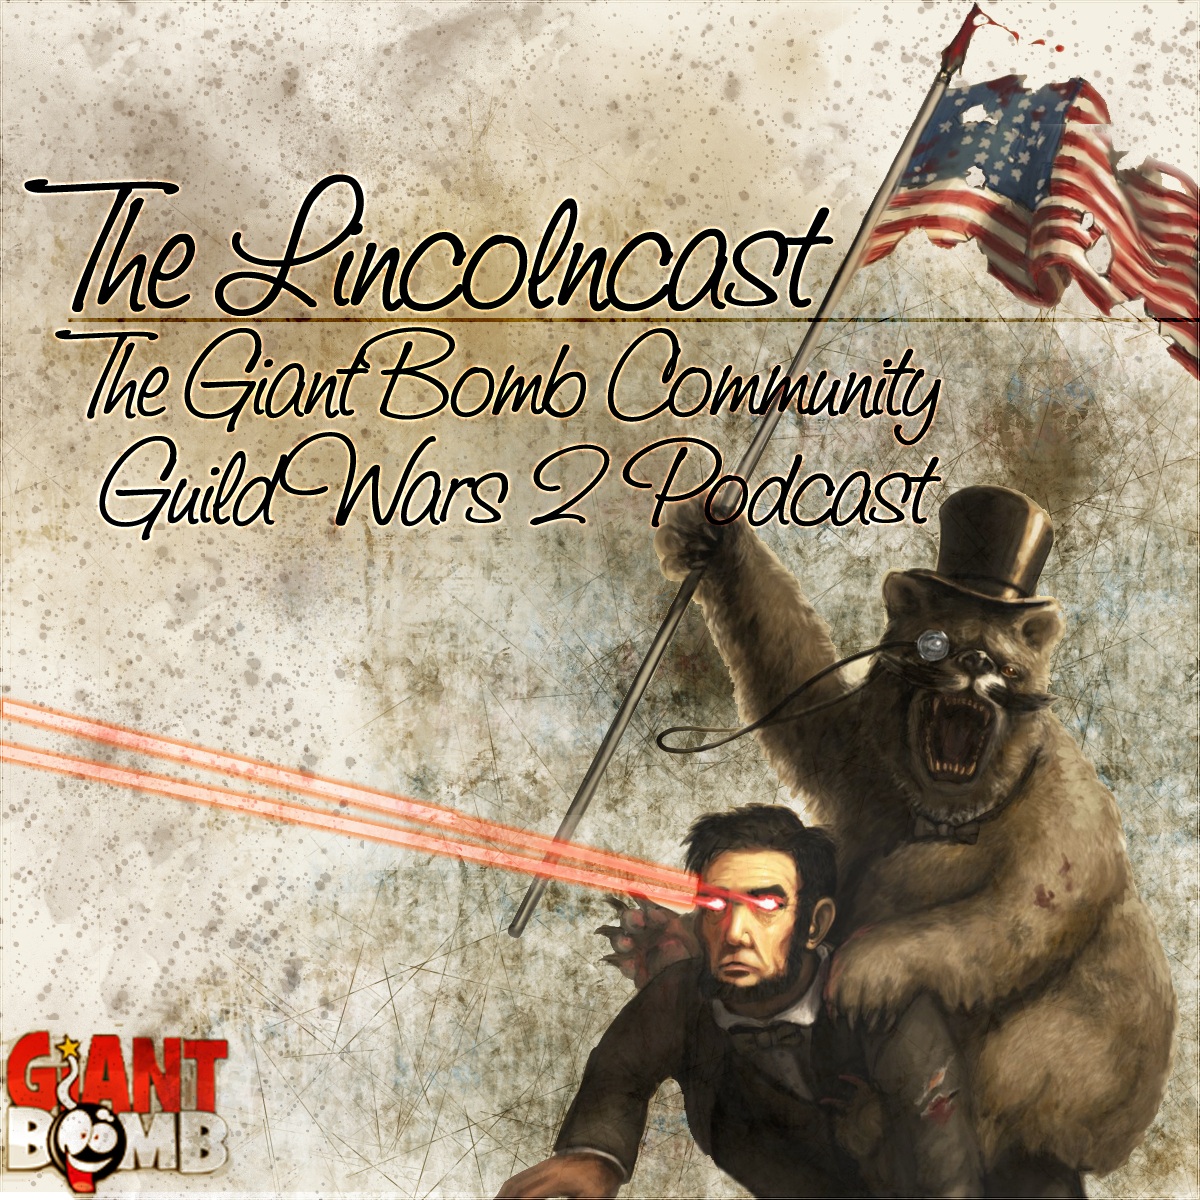 The Lincolncast Episode 11: Balance and Cash